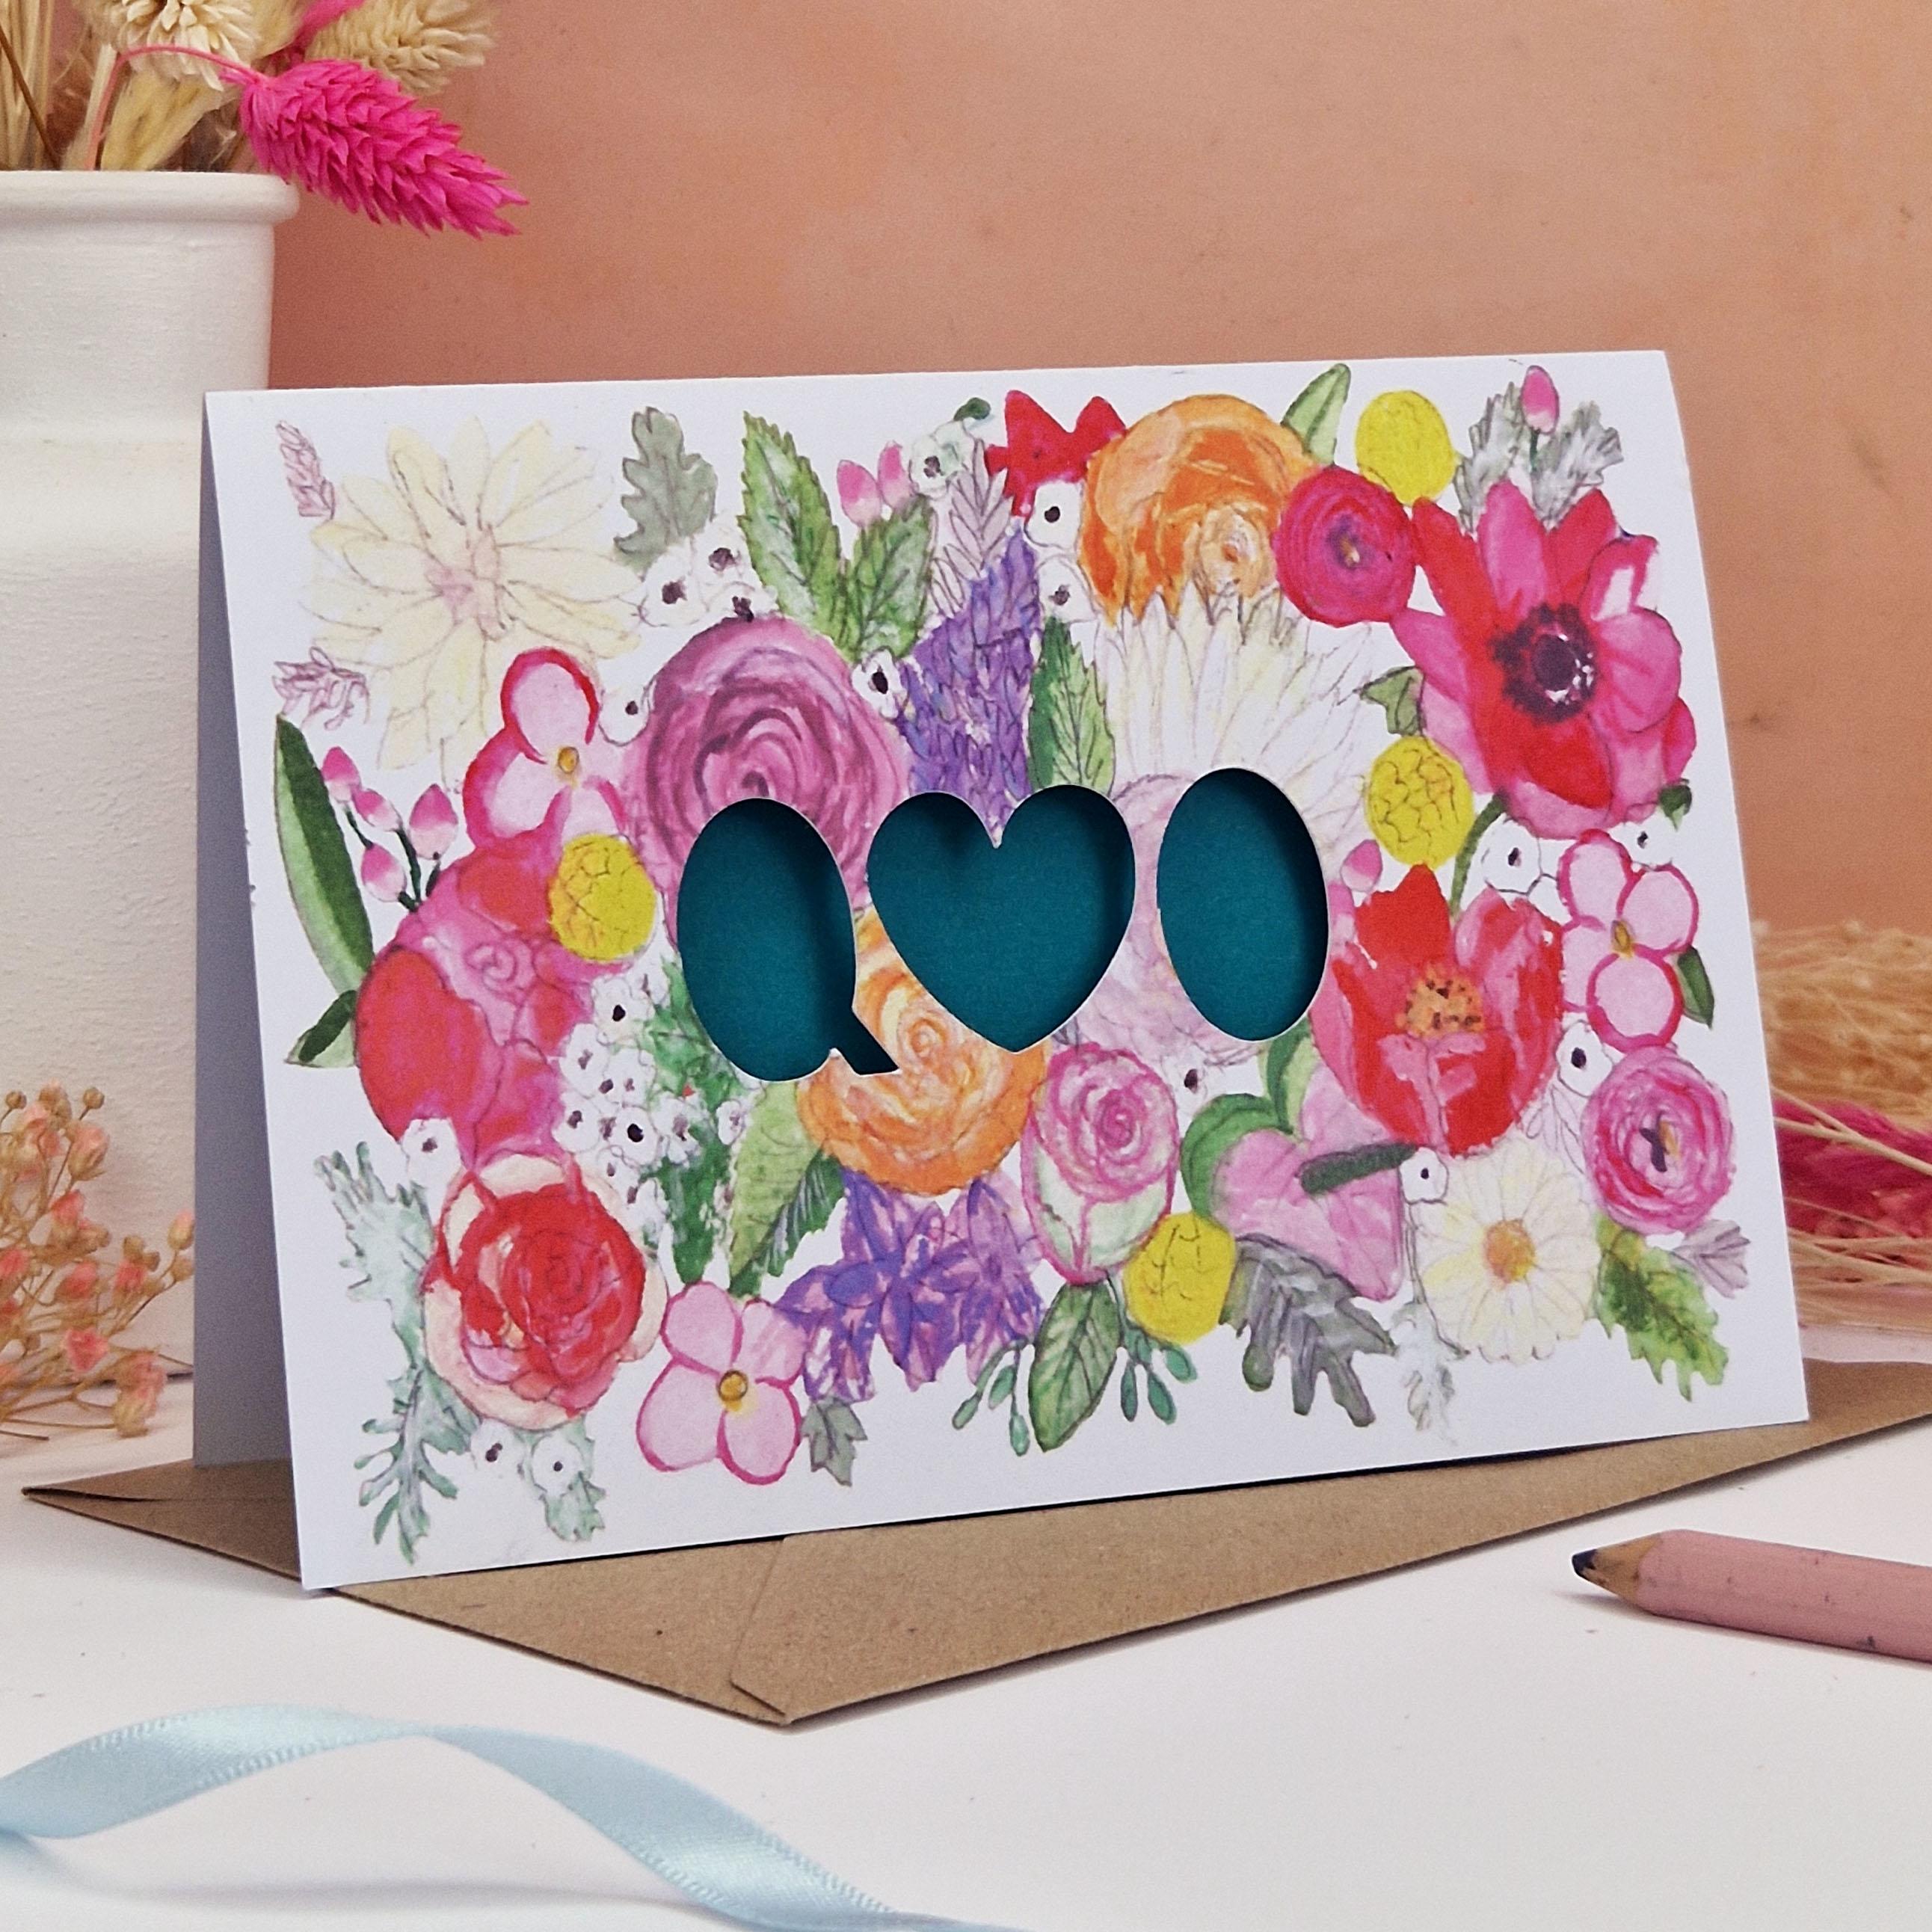 hand shot of Floral Card with Paper cut text that is personalised with Initials with bright floral background and turquiose paper liner inside.